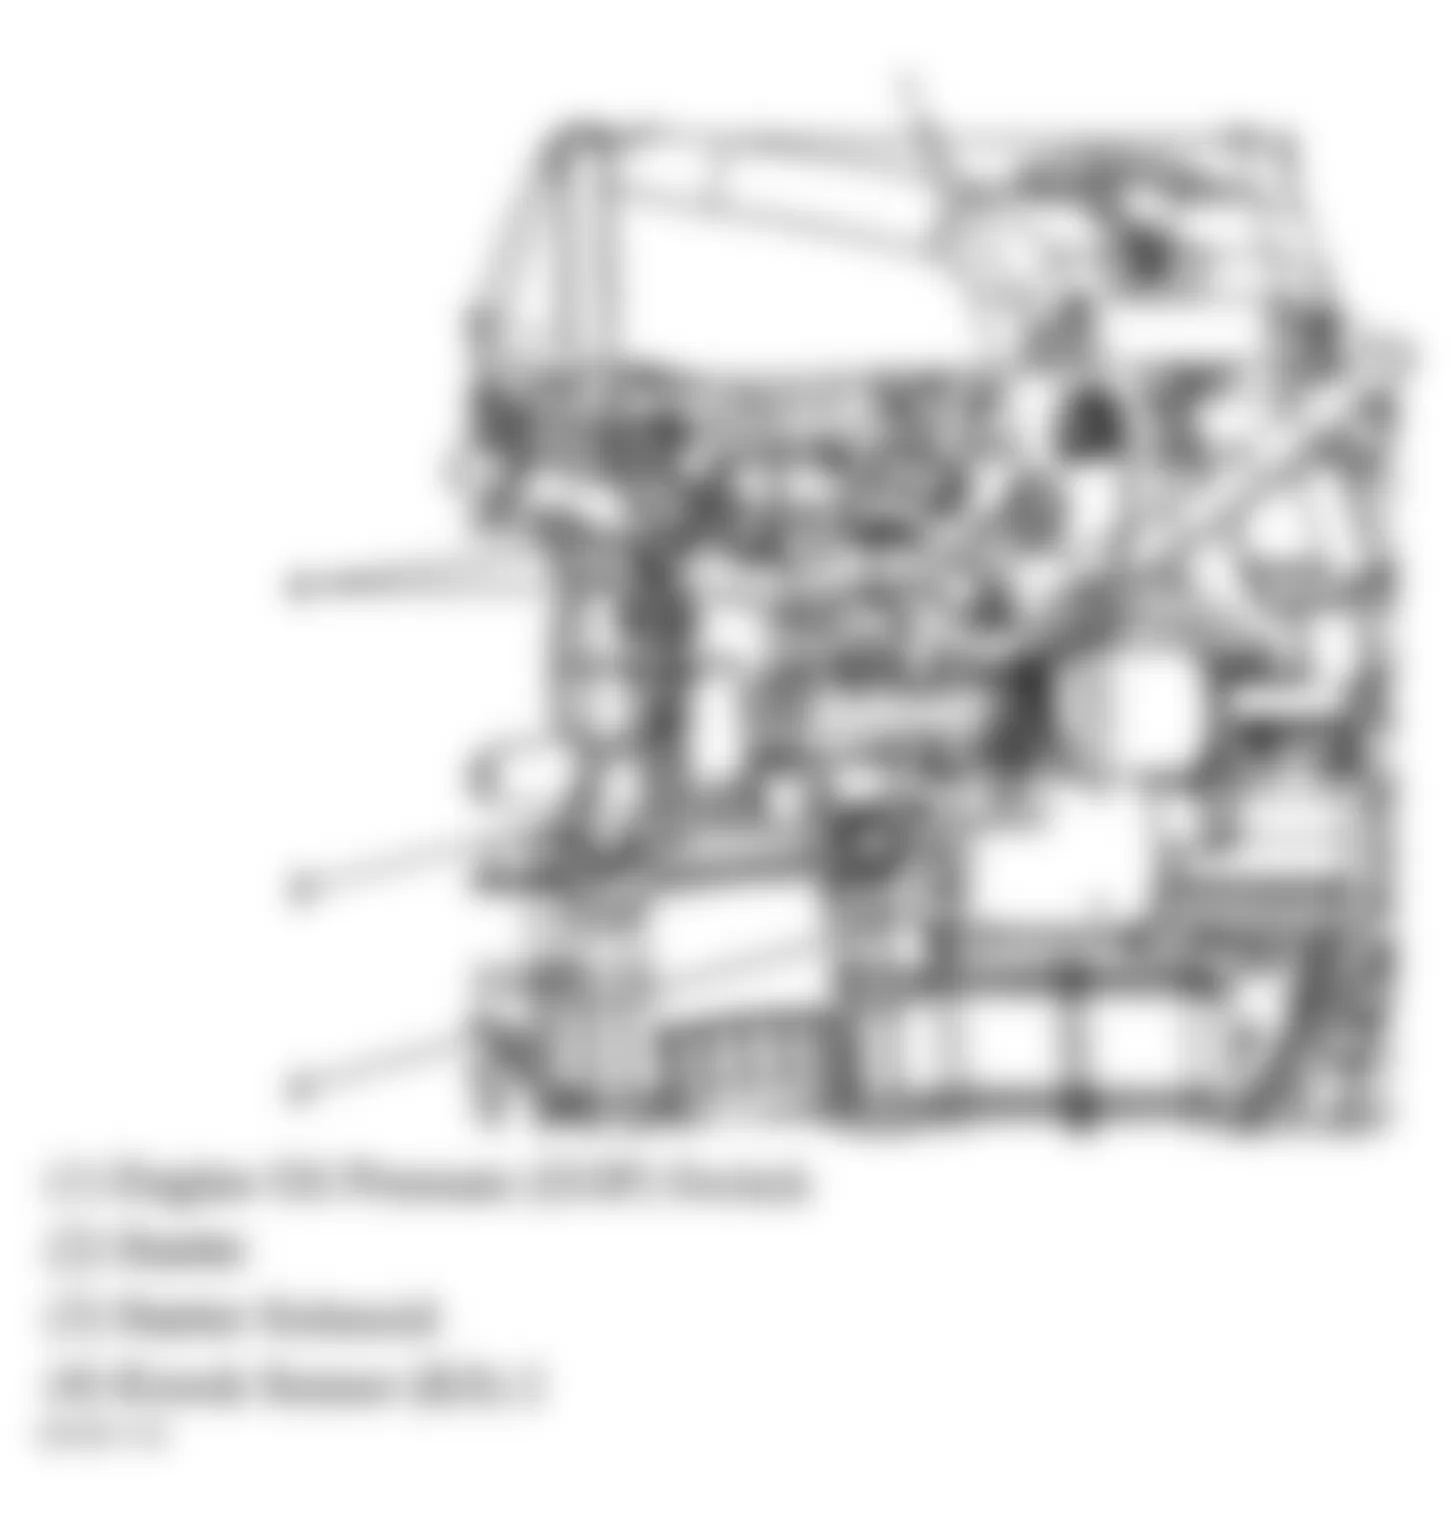 Chevrolet Malibu SS 2007 - Component Locations -  Lower Left Side Of Engine (3.5L)